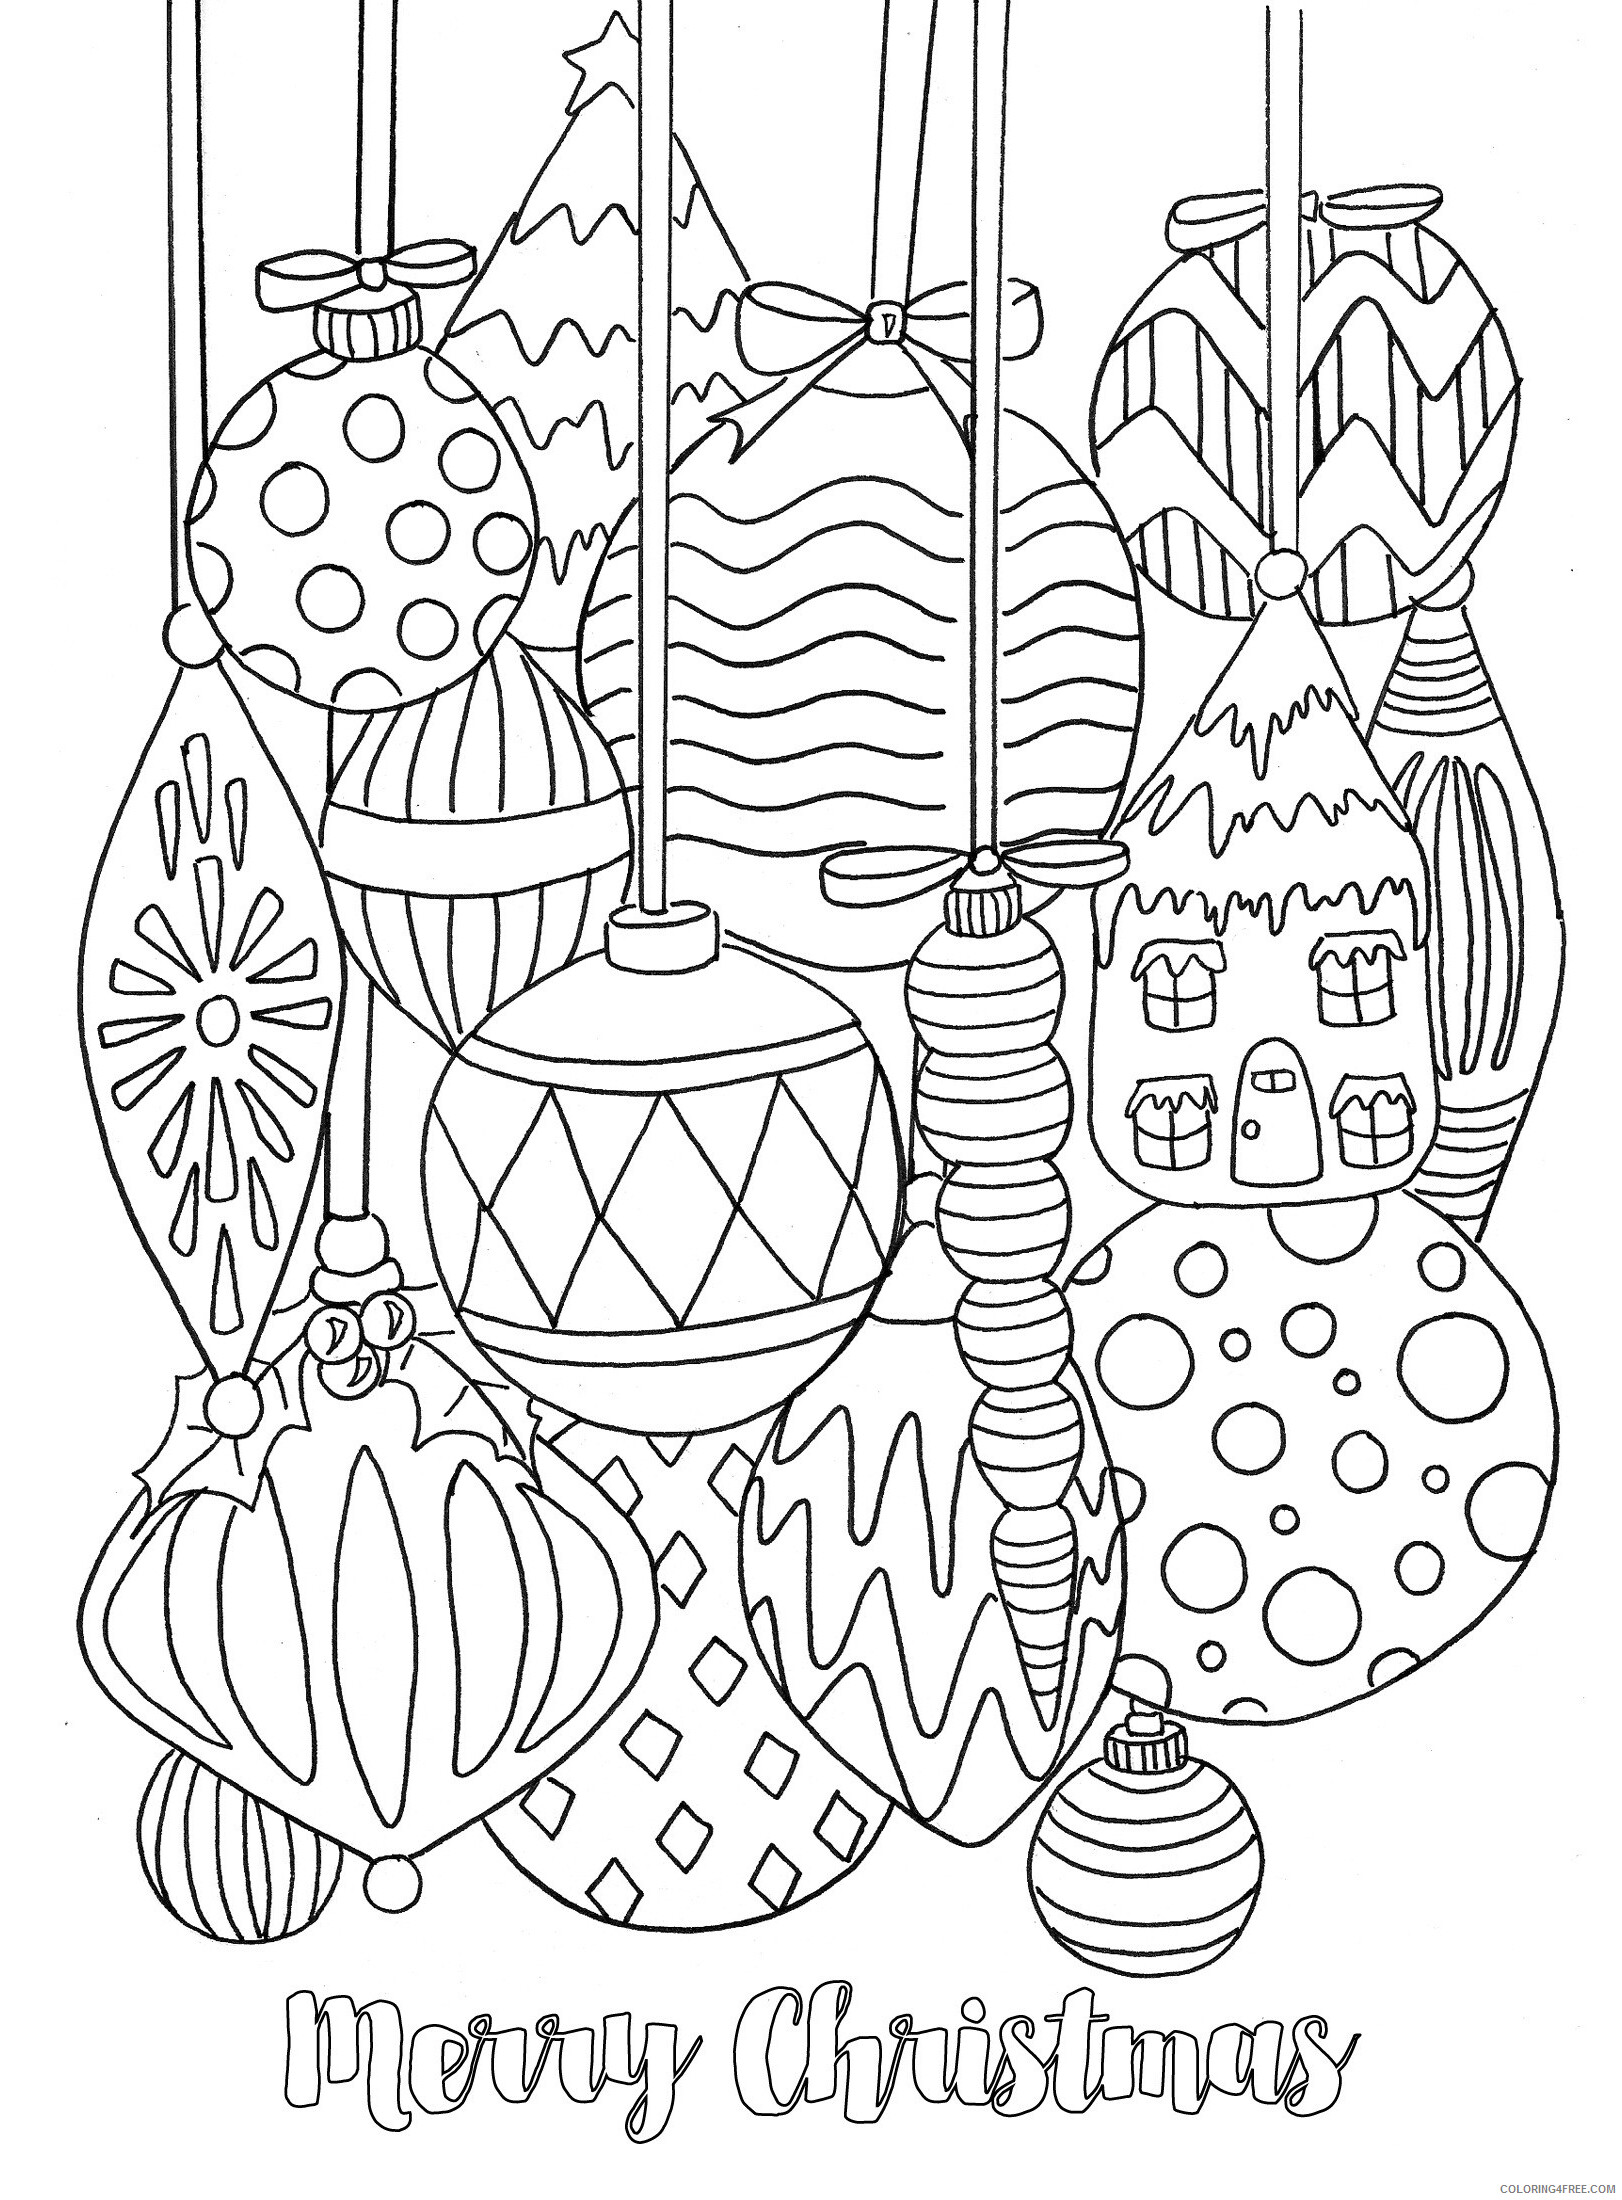 Adult Christmas Coloring Pages Merry Christmas Printable 2020 127 Coloring4free